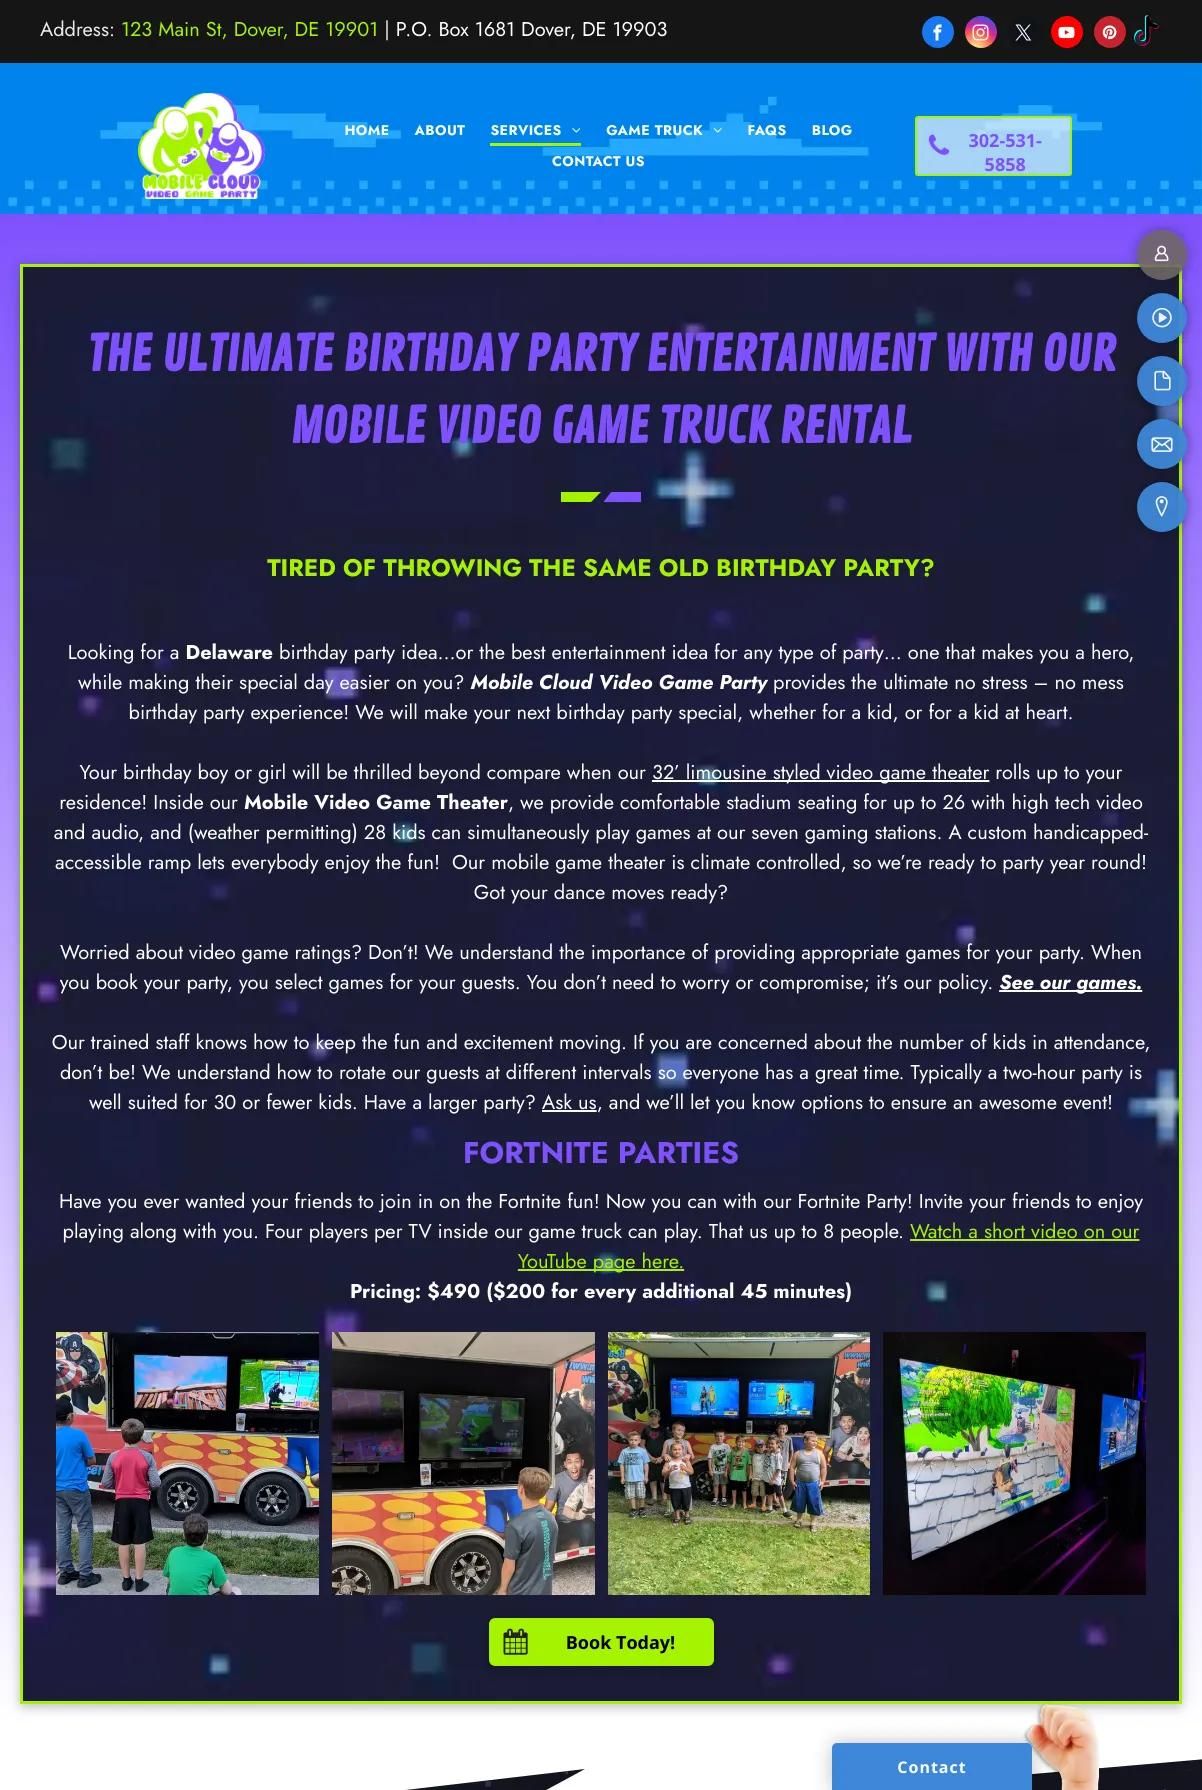 Screenshot 3 of Mobile Cloud Video Game Party (Example Duda Website)